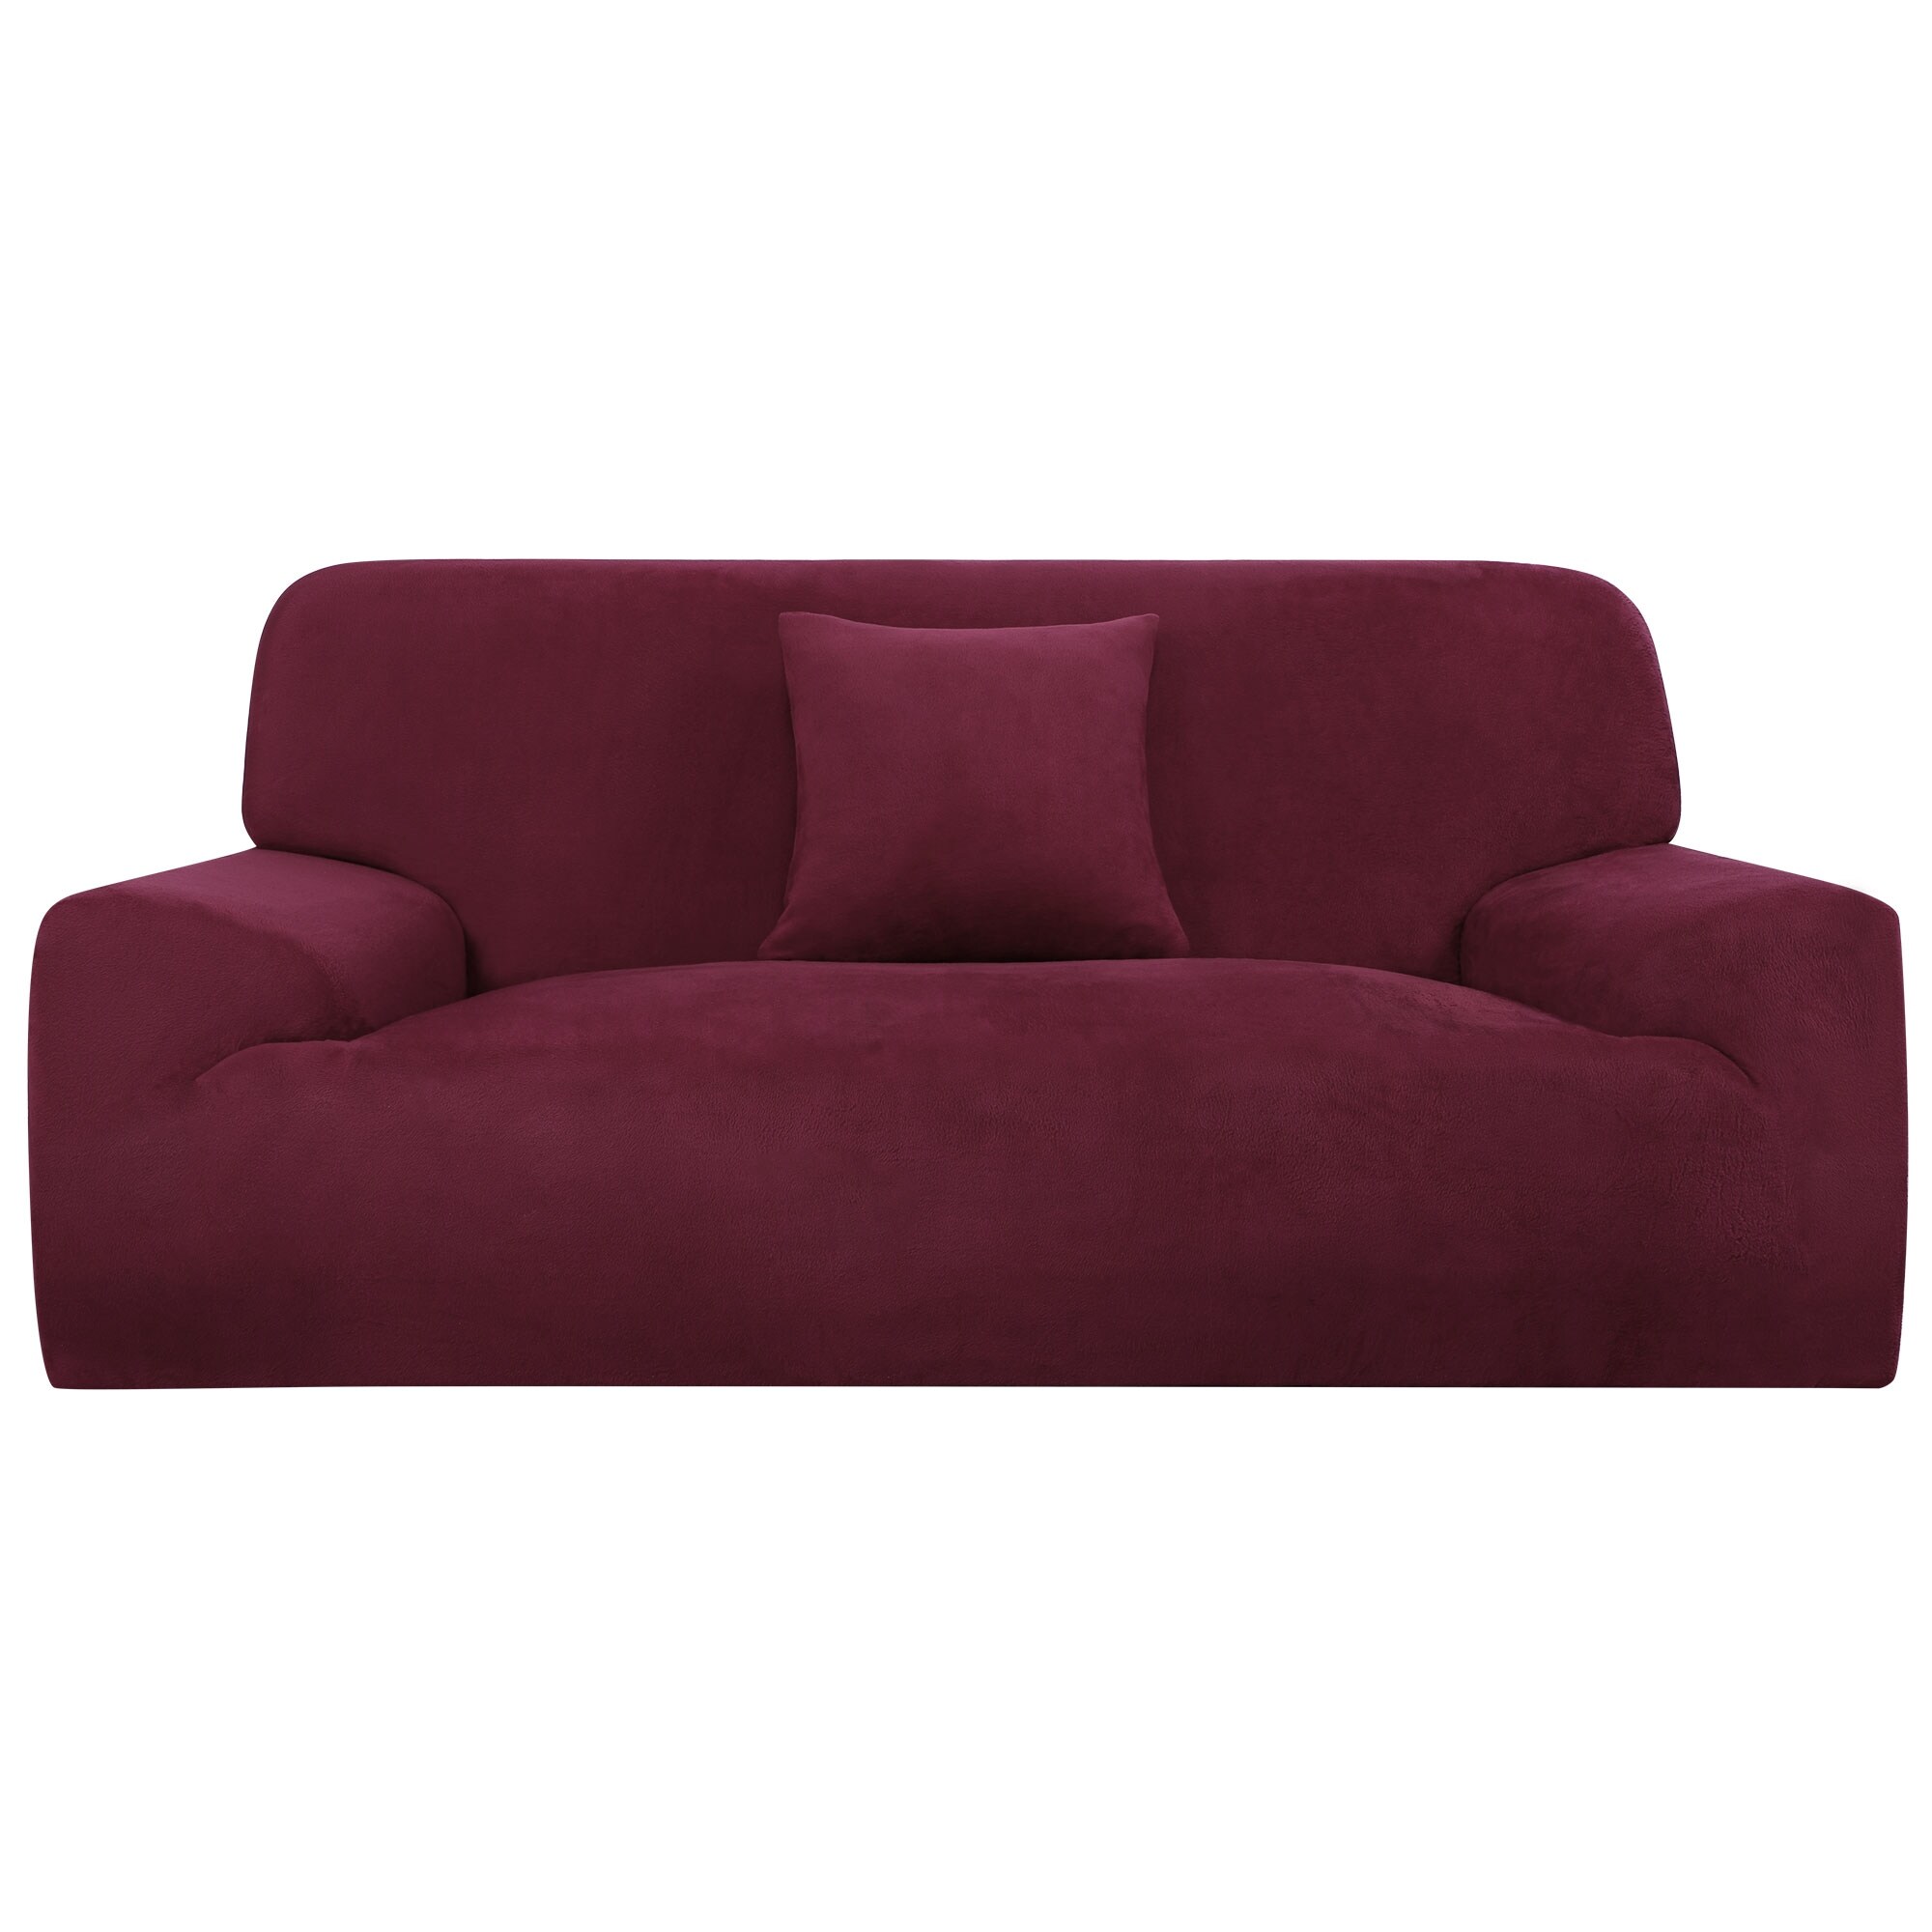 Details about   2/3Seater Stretch Velvet Sofa Cover Plush Soft Couch Elastic Slipcover Protector 